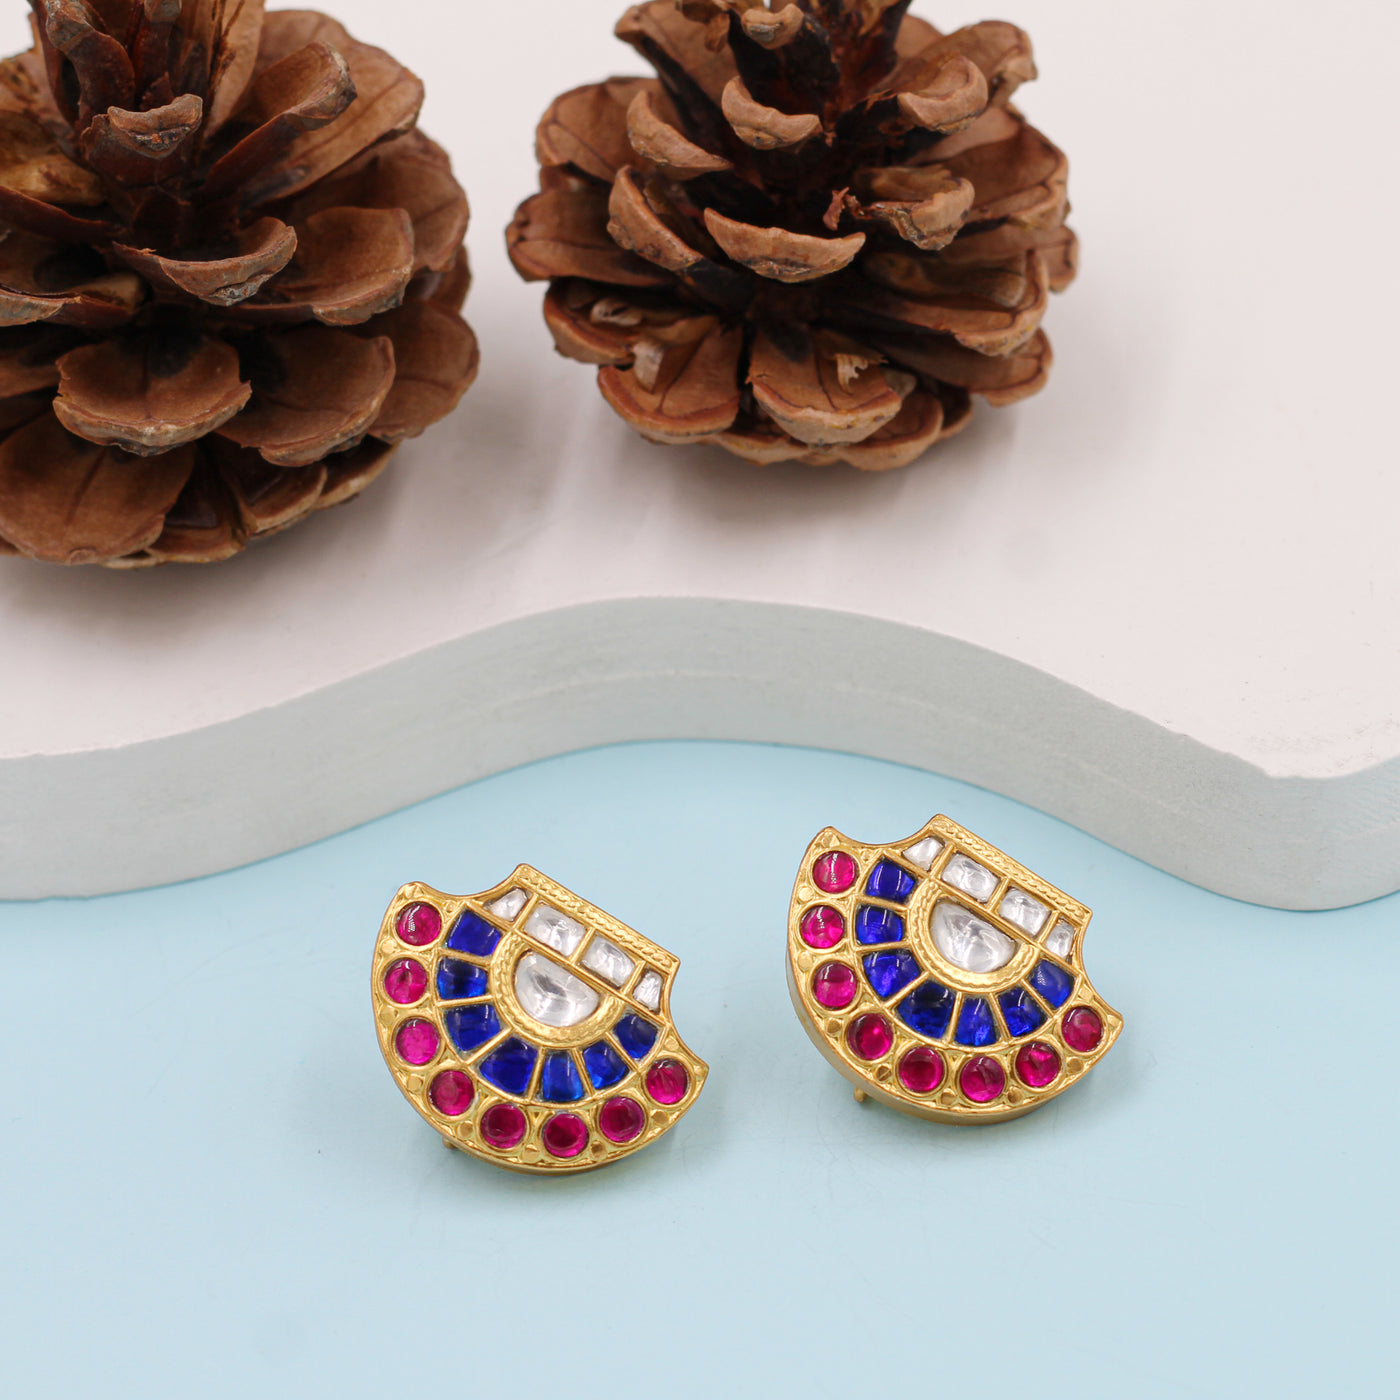 Silver Earrings featuring Kundan Setting and Gold Plating